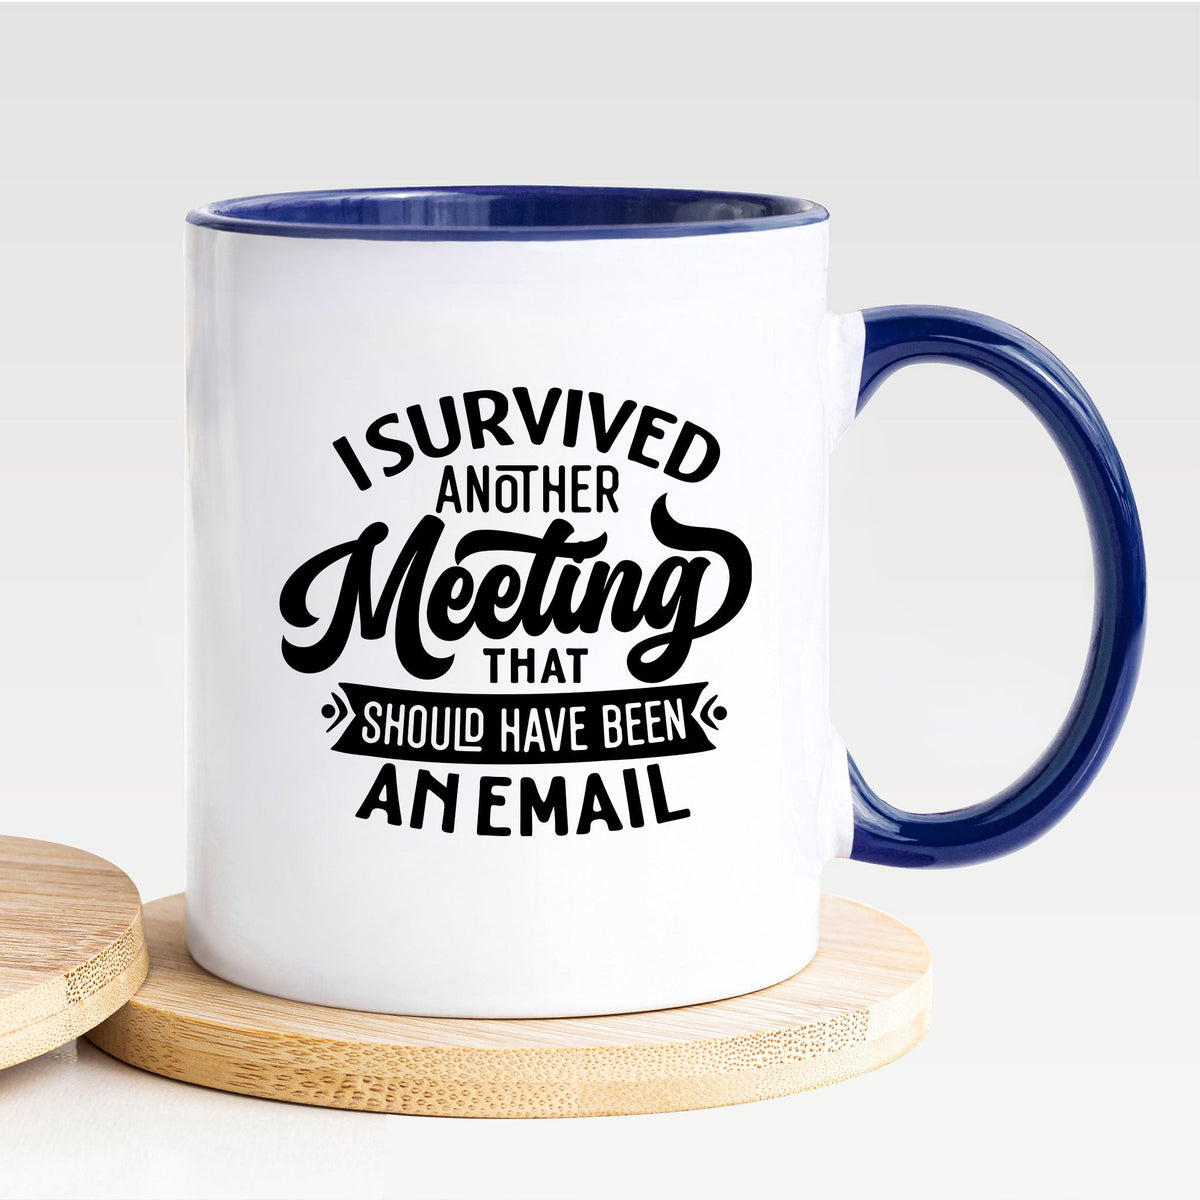 I Survived Another Meeting That Should Have Been An Email - Mug